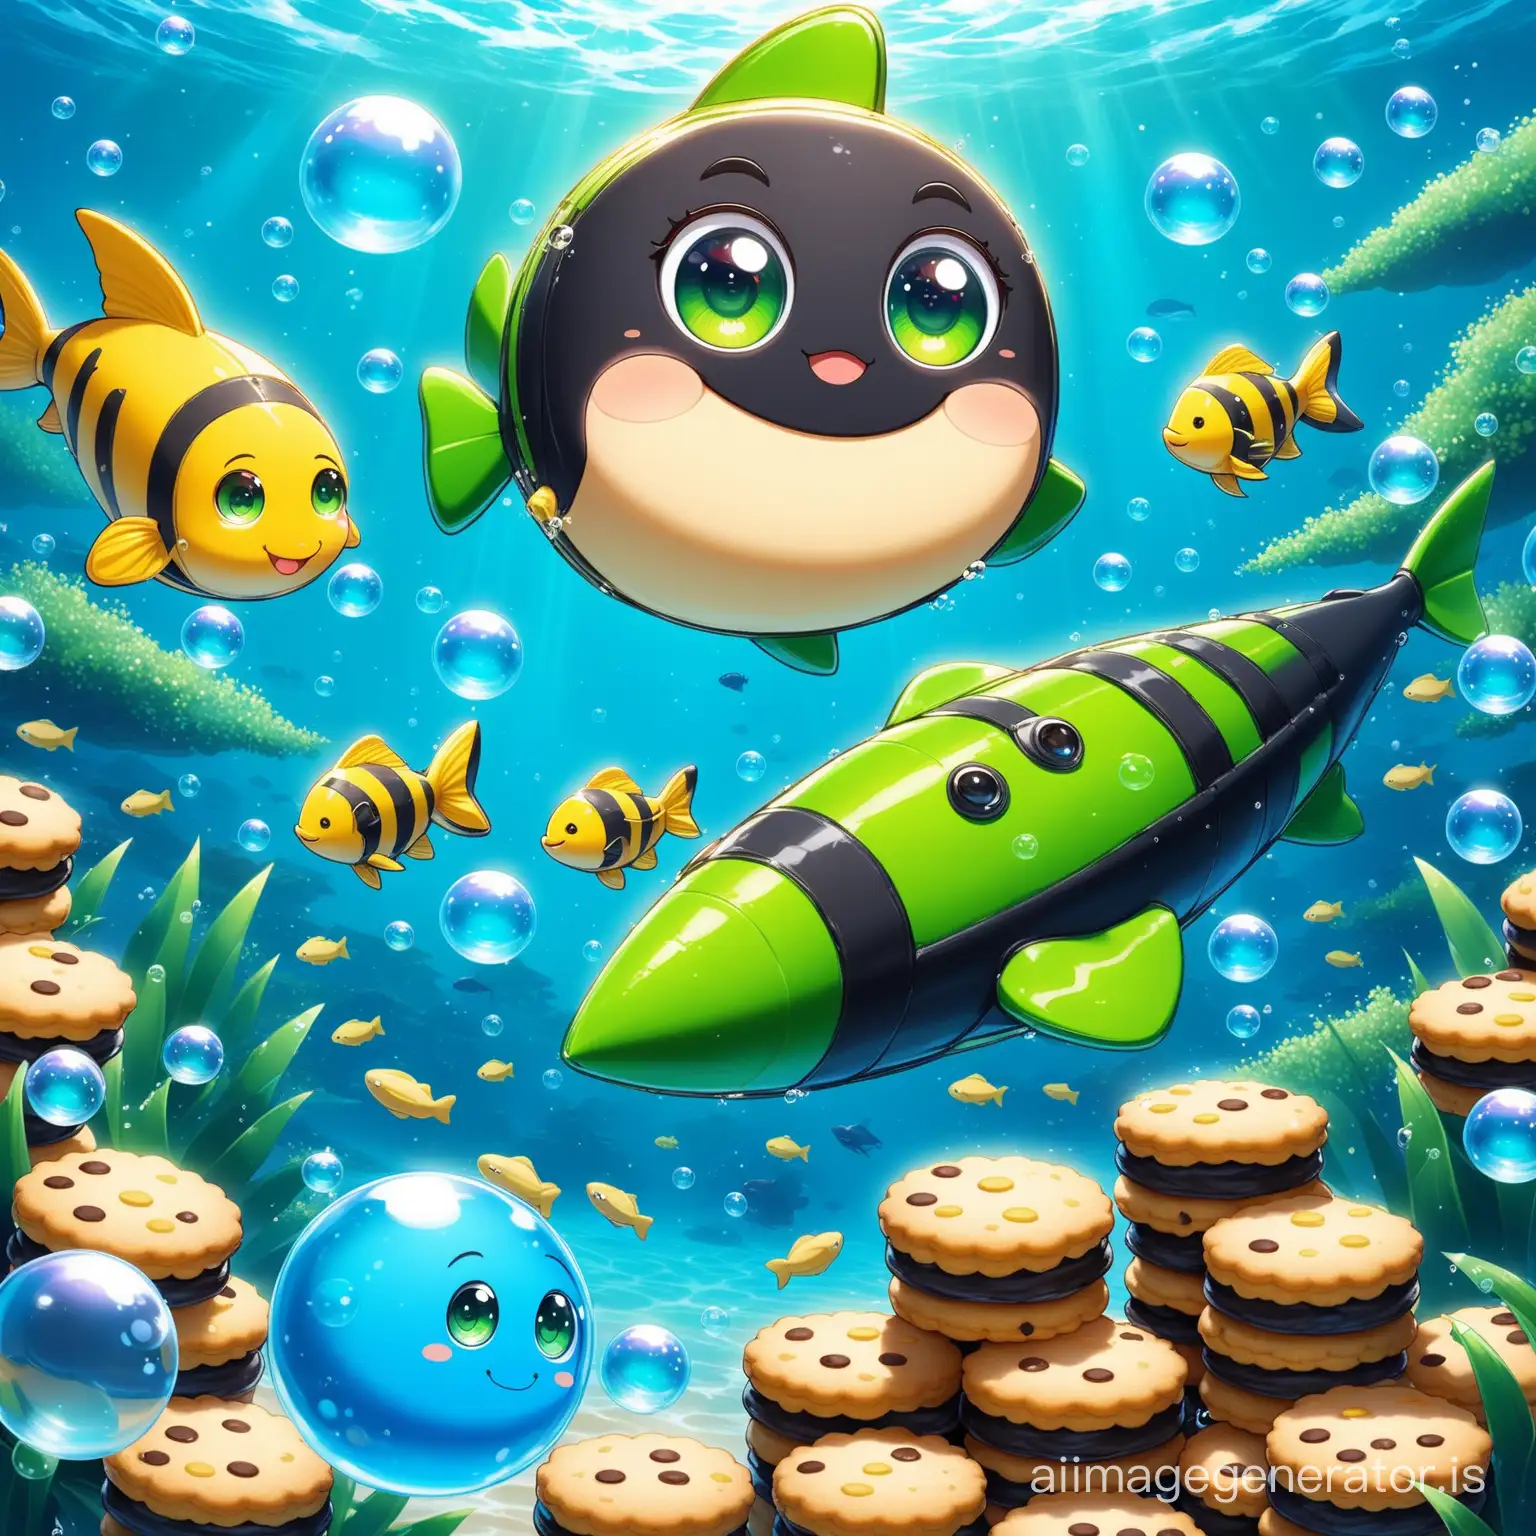 Joyful-Black-Fish-Cookie-Swimming-Amongst-Detailed-Bananas-and-Floating-Cookies-in-a-Blue-Bubblefilled-Sea